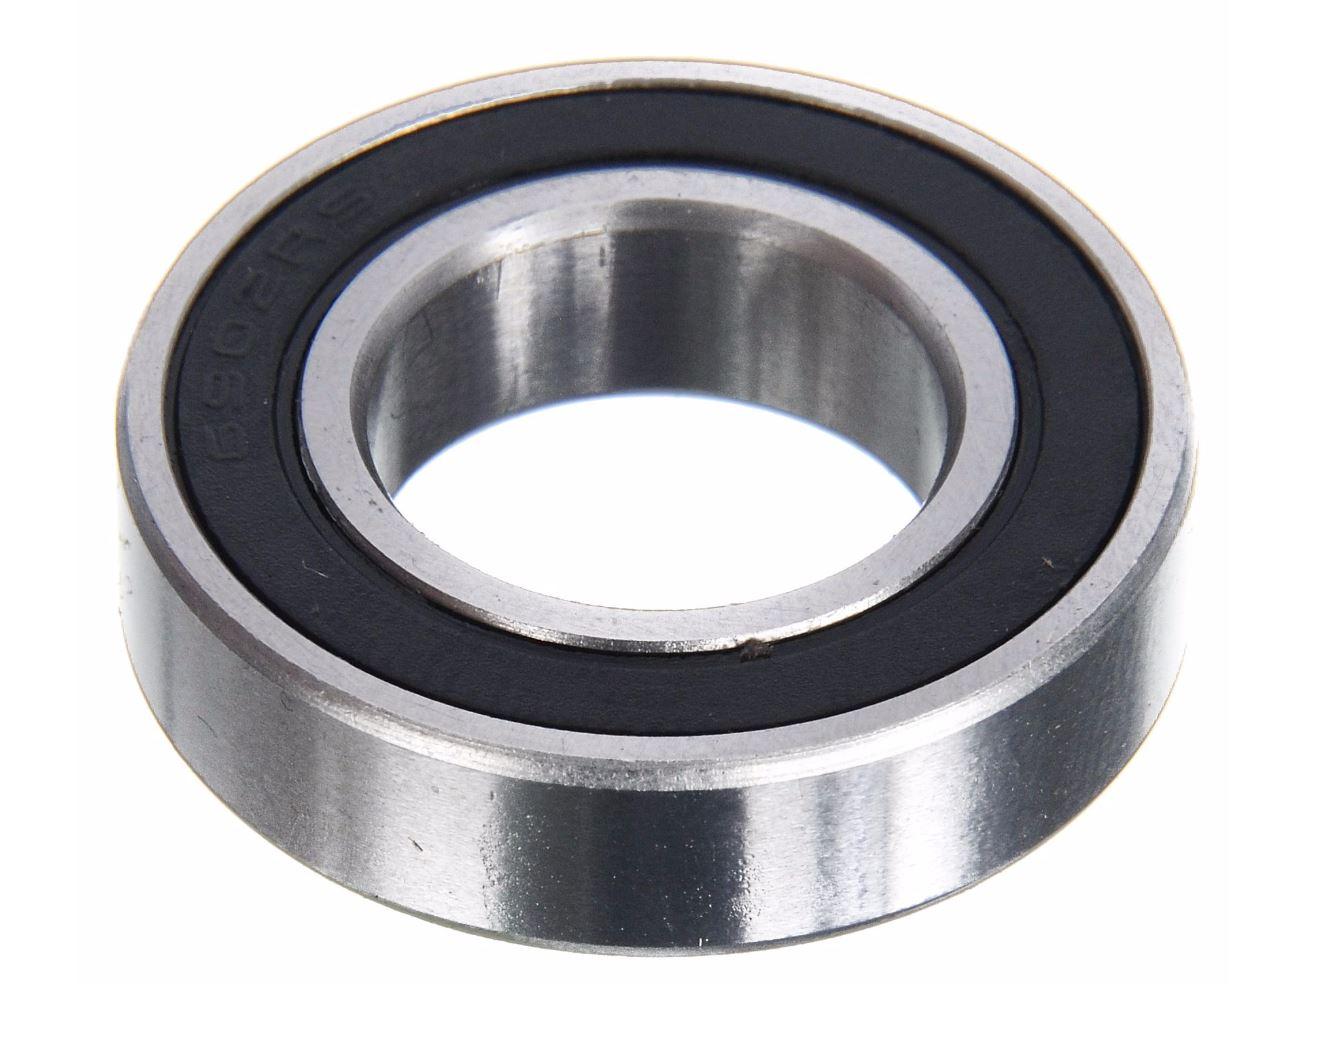 Brand-x Sealed Bearing 6902 (2rs) - Silver